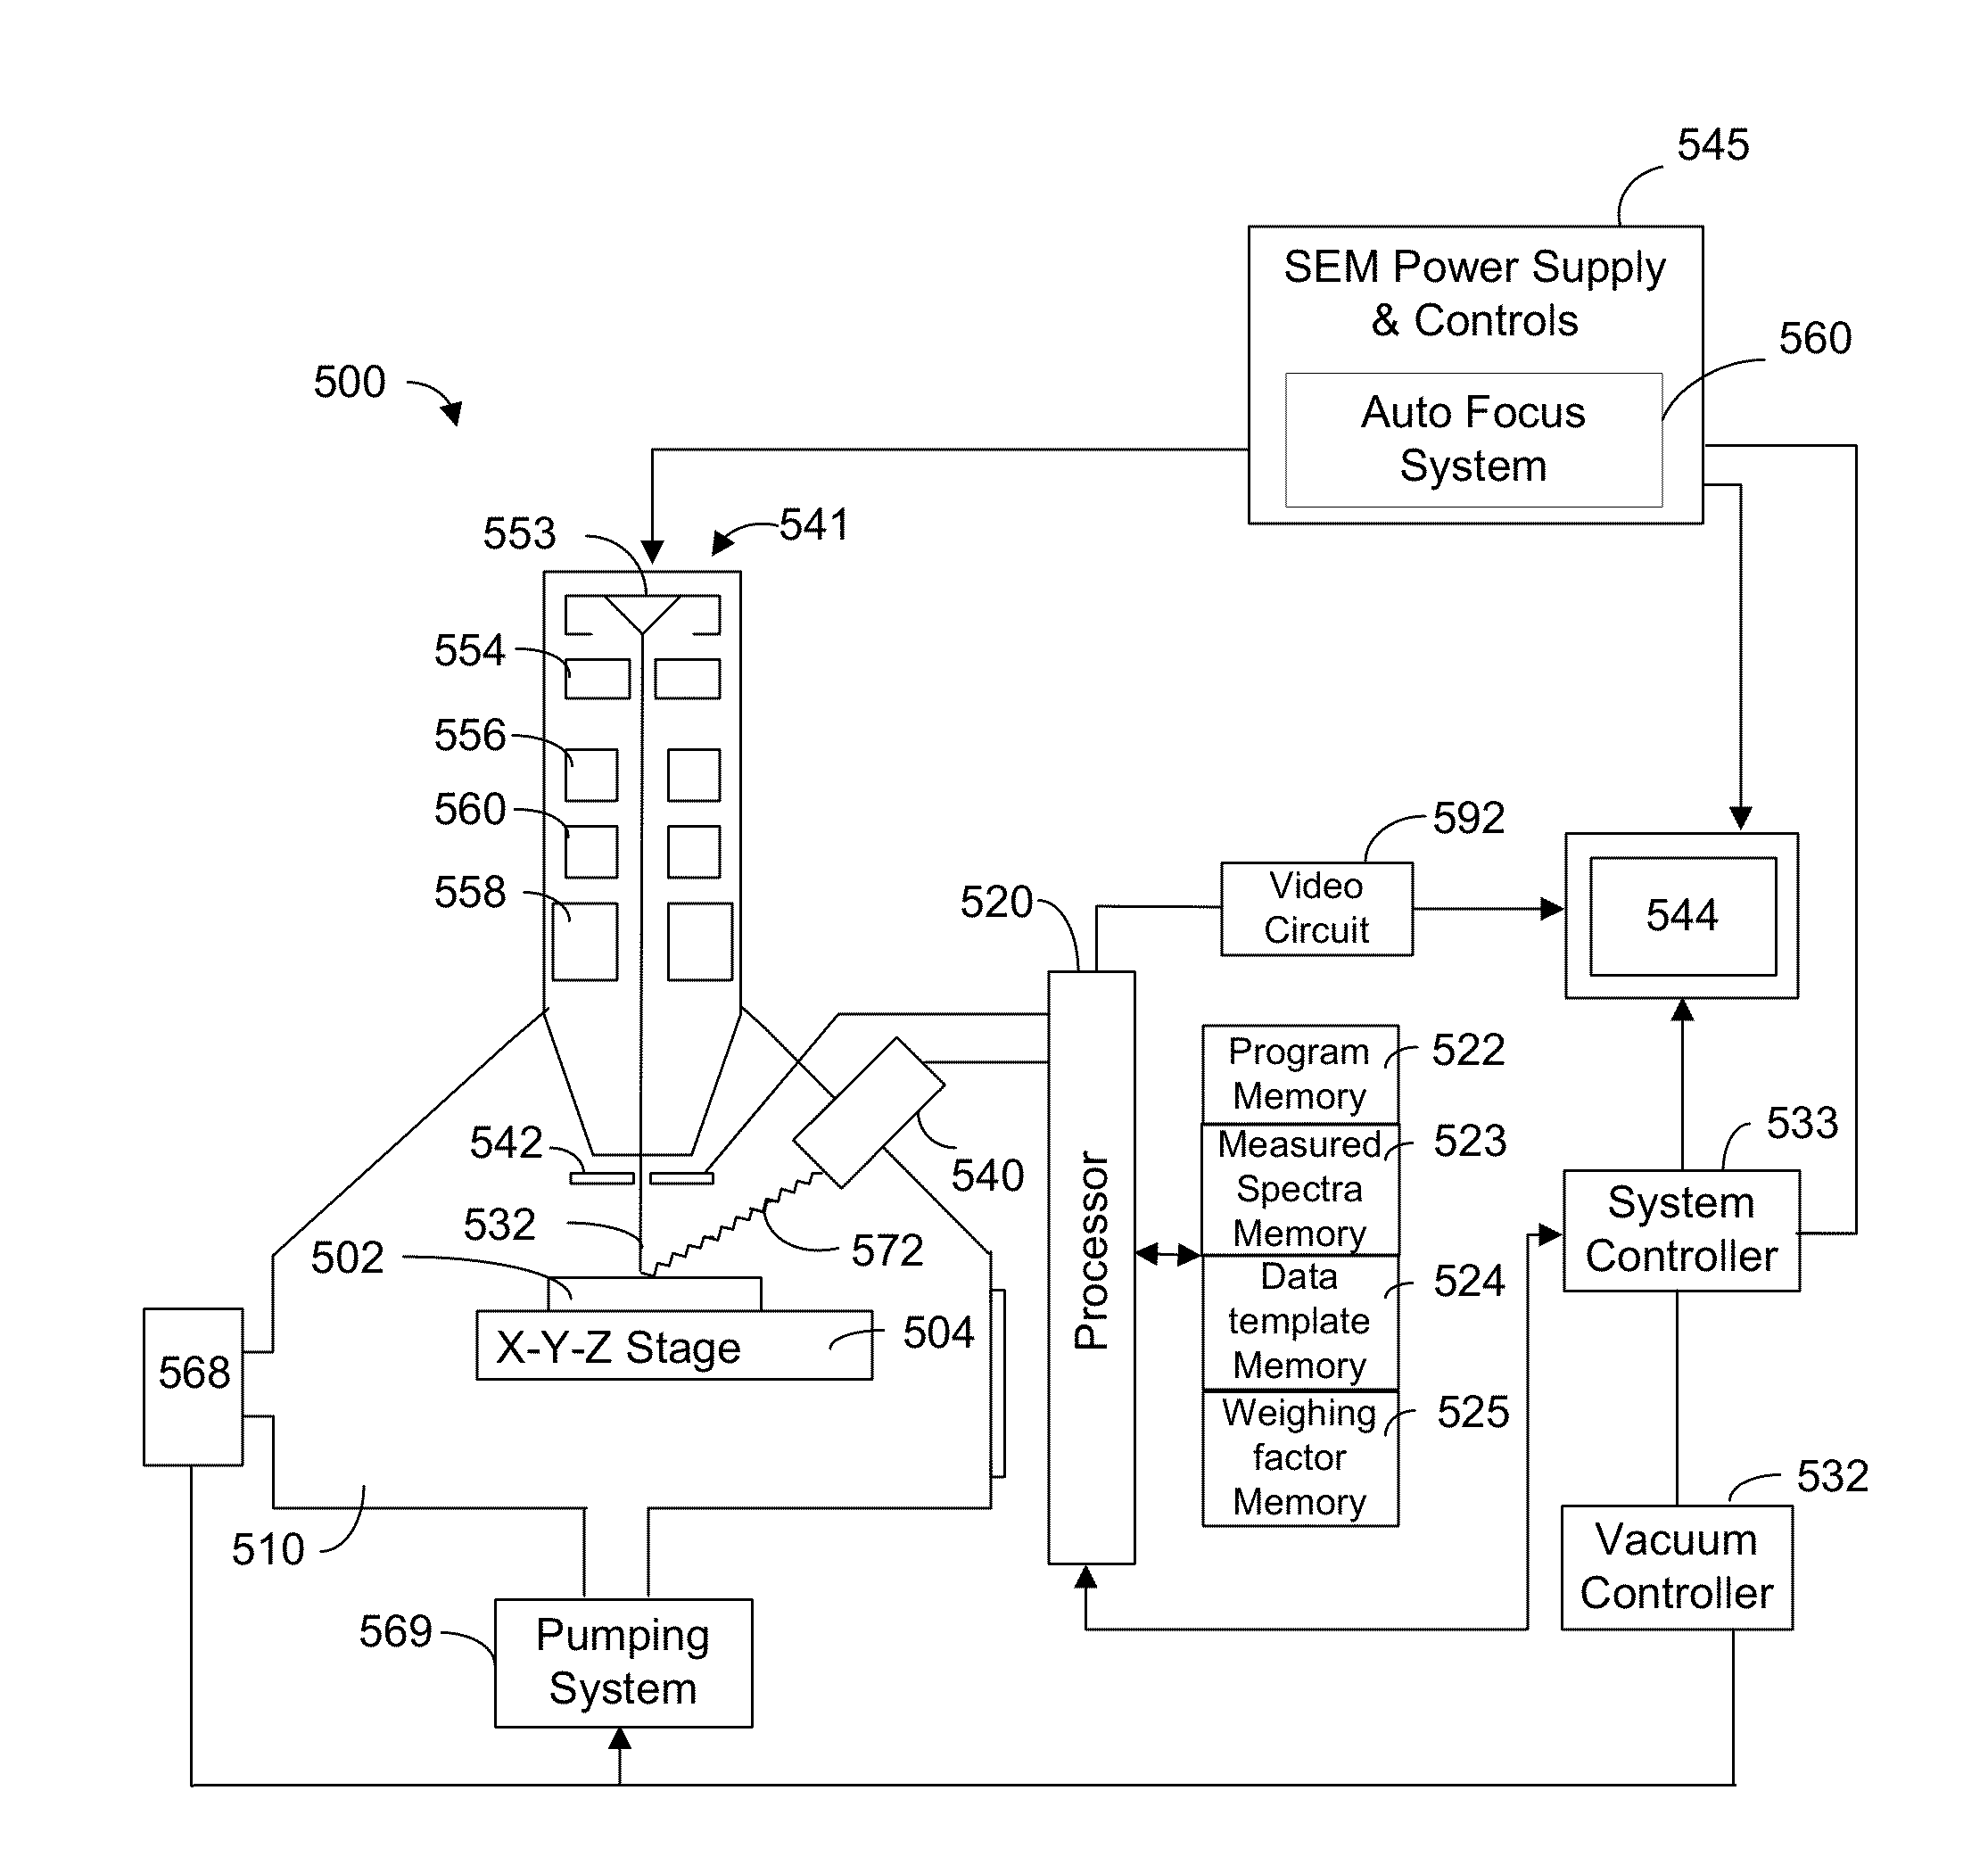 Process for Performing Automated Mineralogy